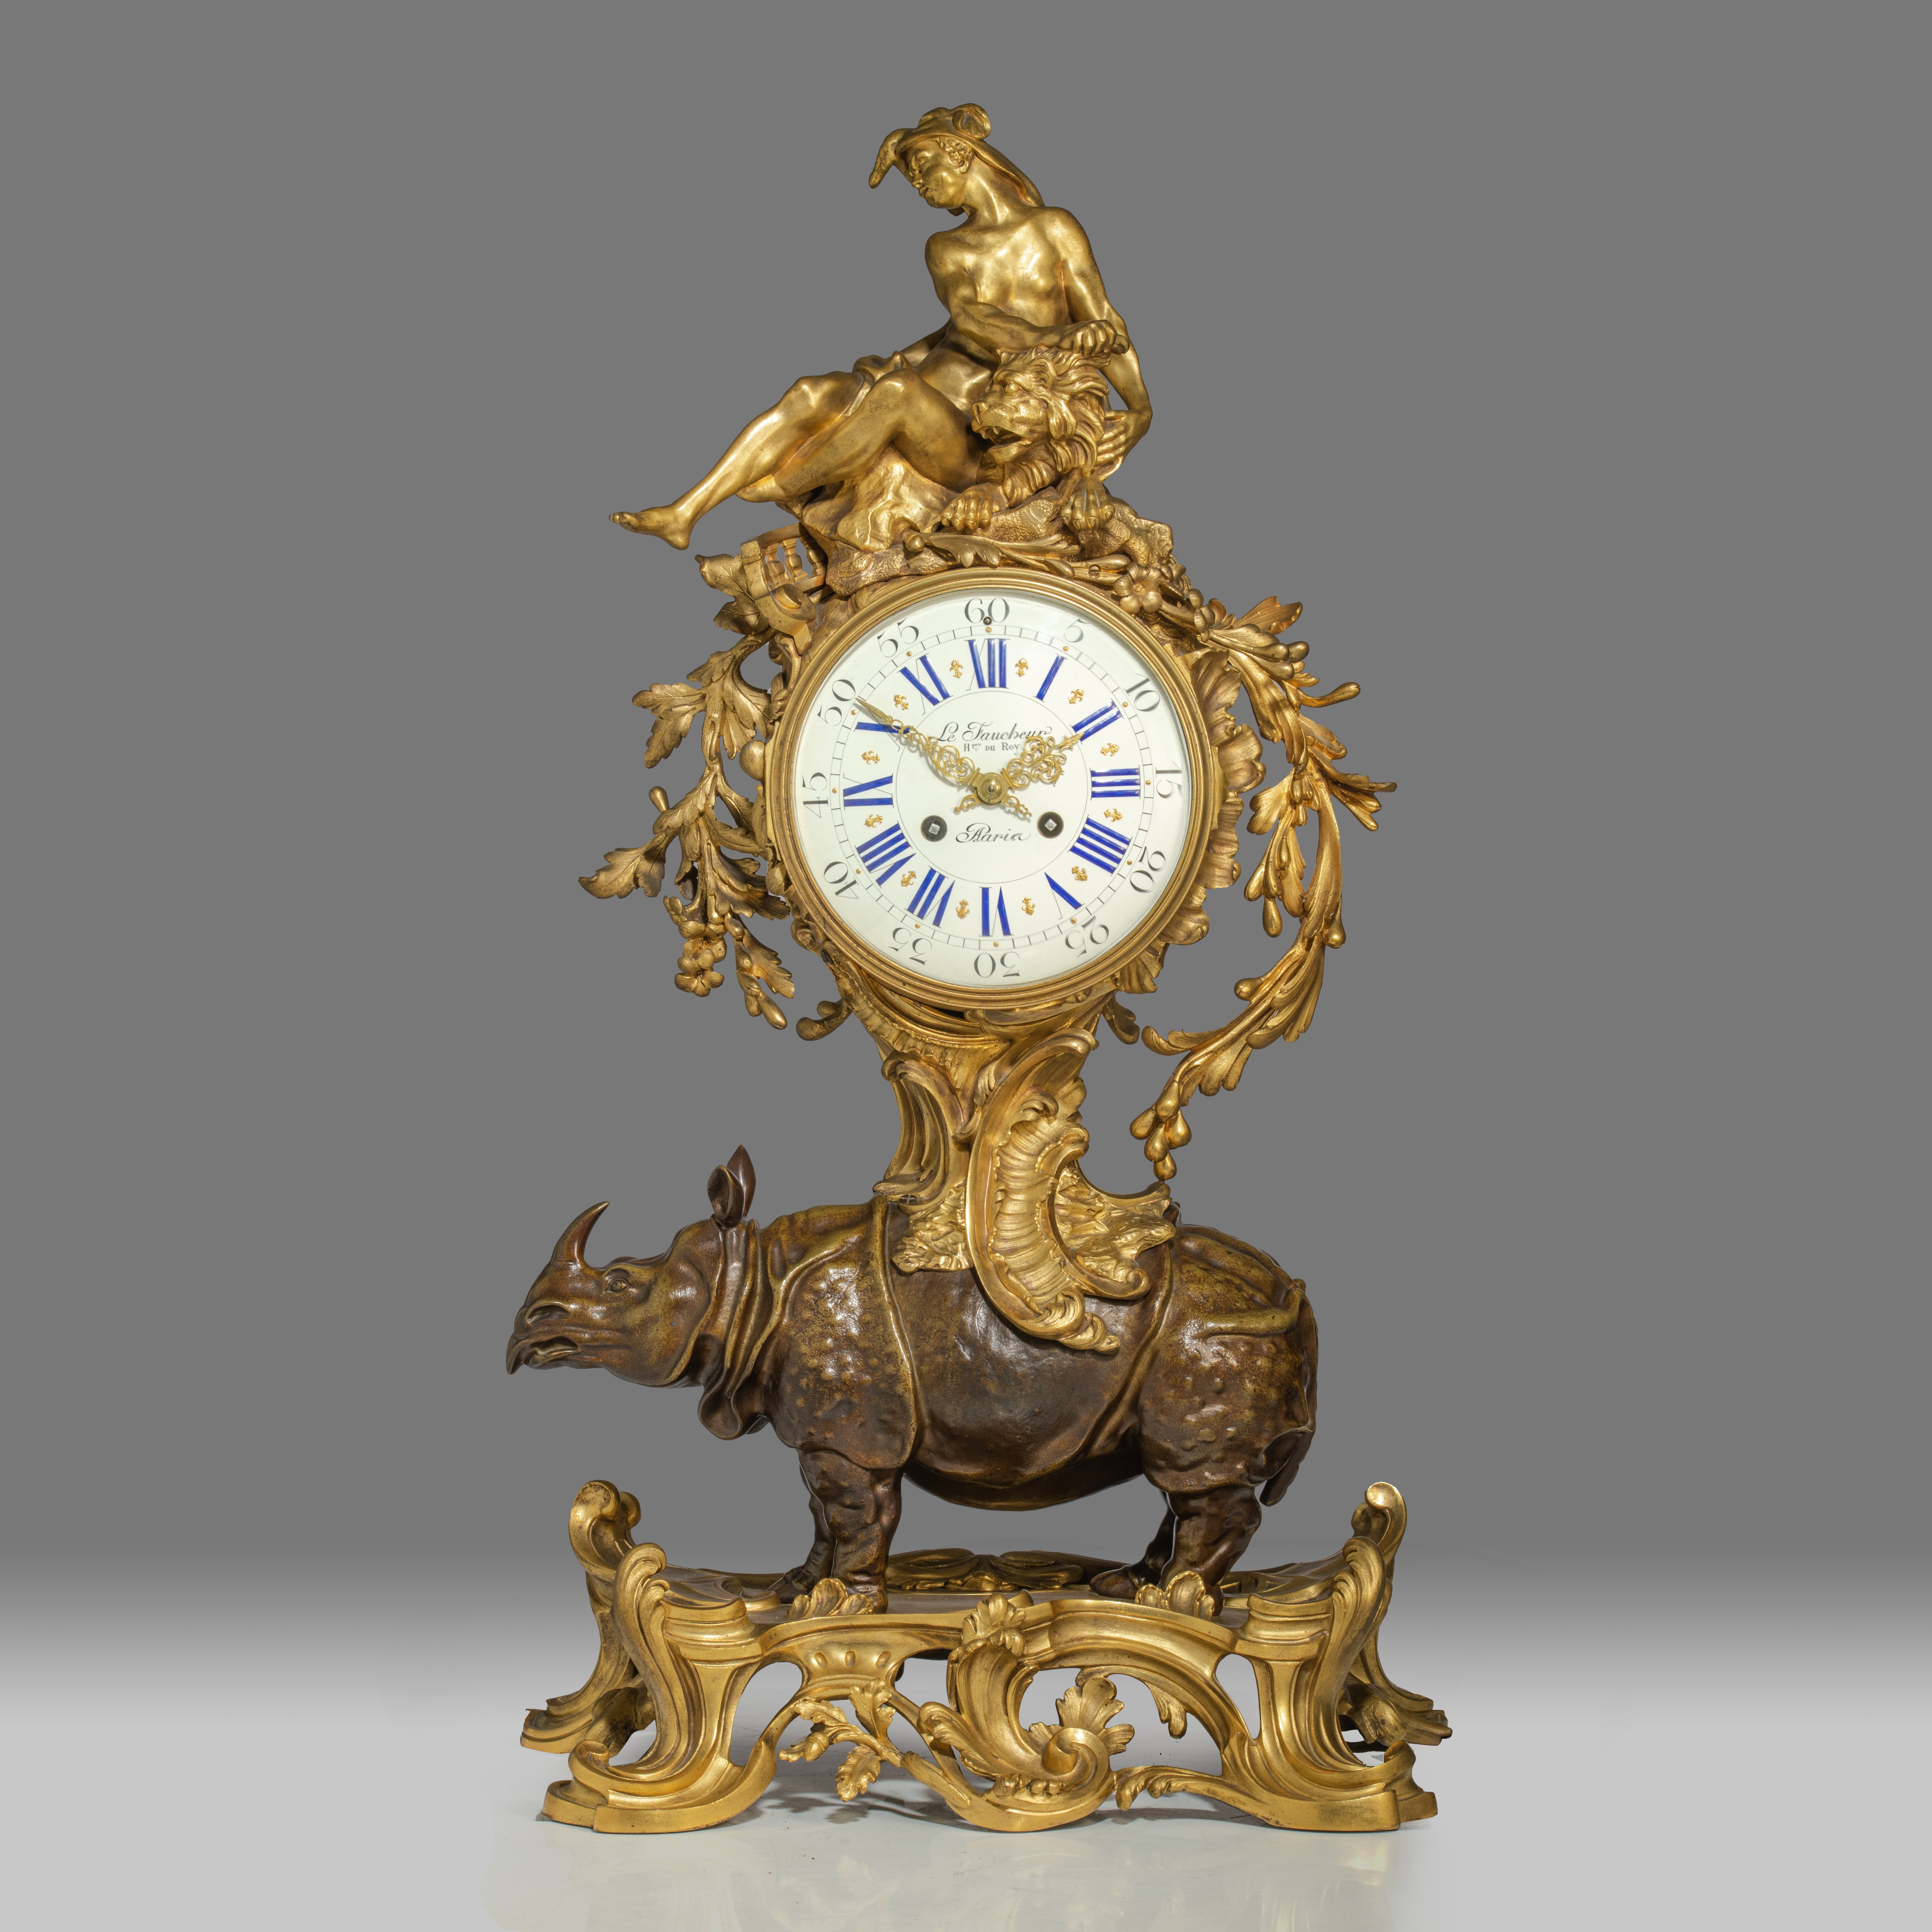 A very imposing Rococo style rhinoceros mantel clock, the dial signed 'Le Faucheur, Paris', H 77 - W - Image 2 of 12